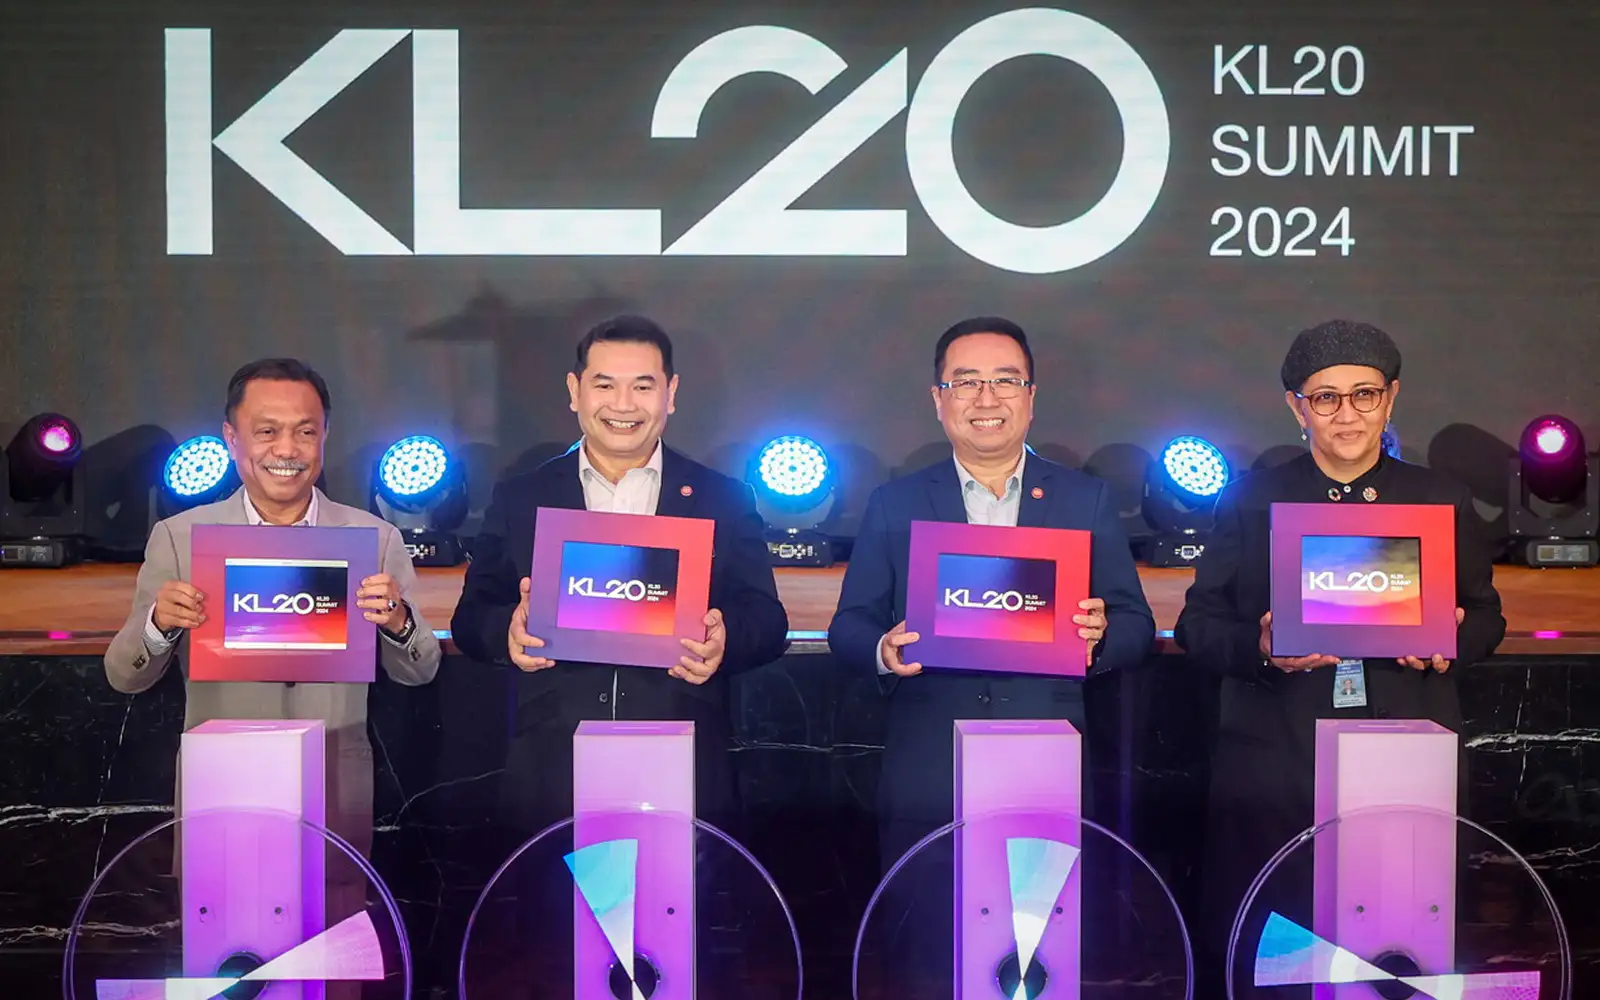 startups, venture capitalists praise kl20 for connecting stakeholders